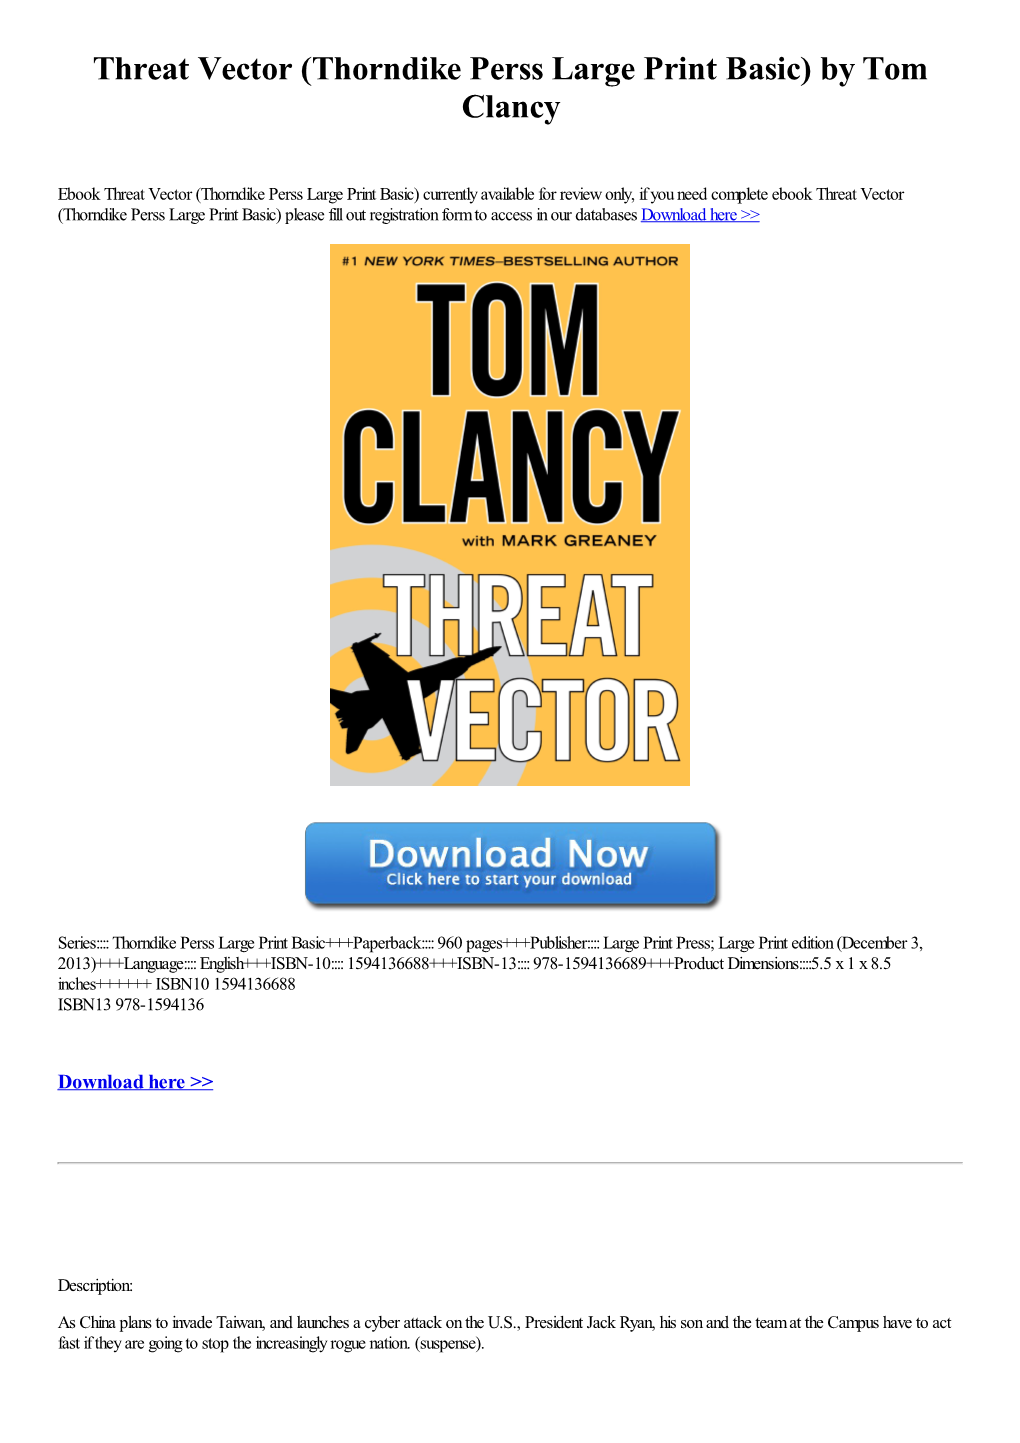 Threat Vector (Thorndike Perss Large Print Basic) by Tom Clancy